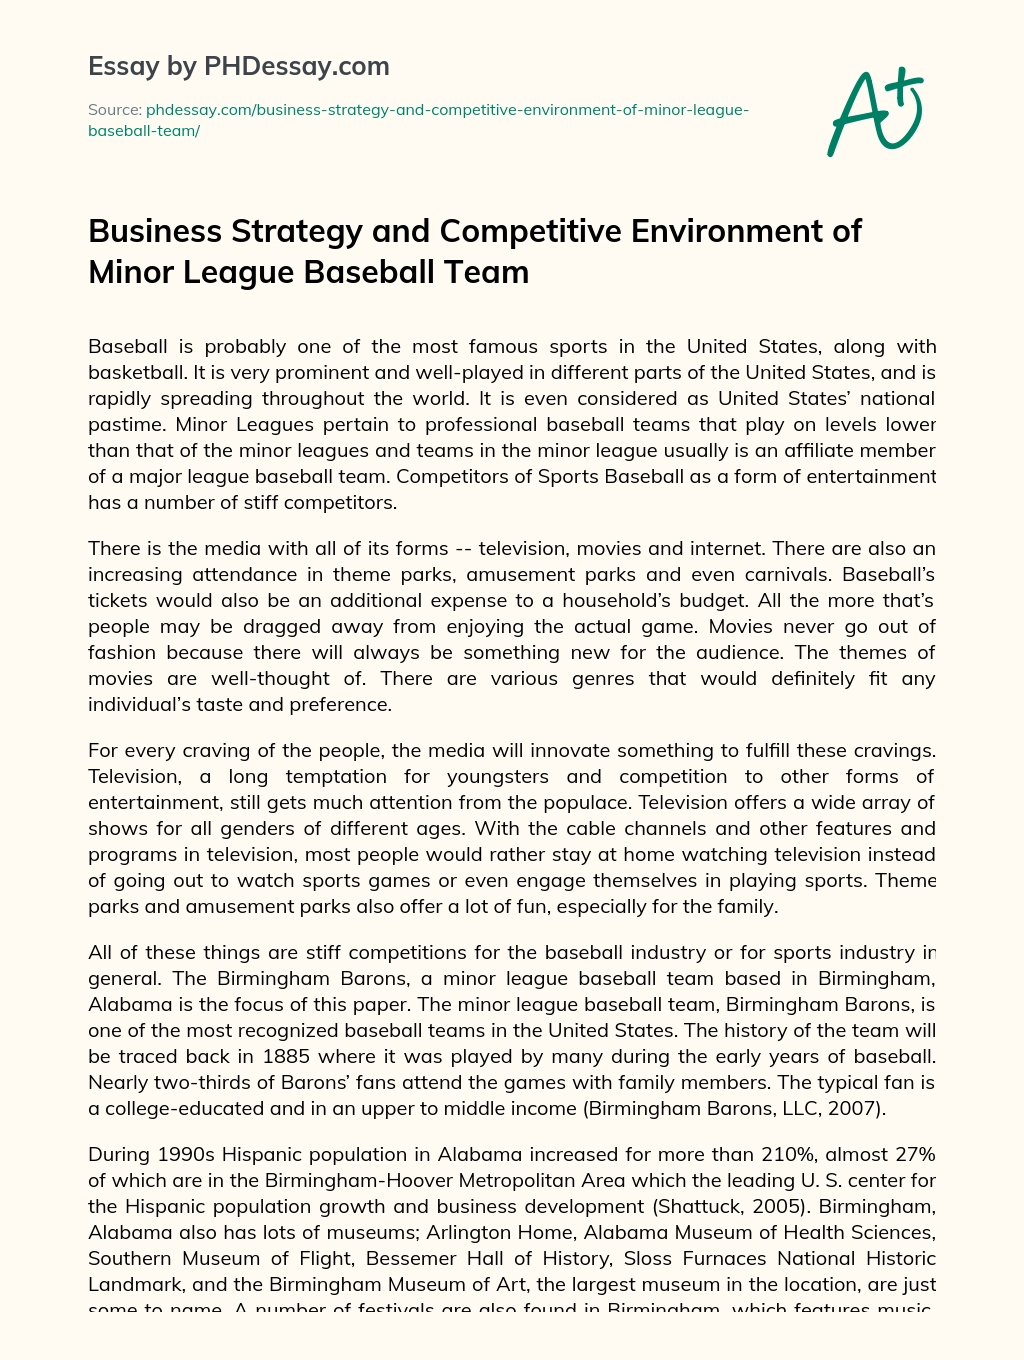 Business Strategy and Competitive Environment of Minor League Baseball Team essay